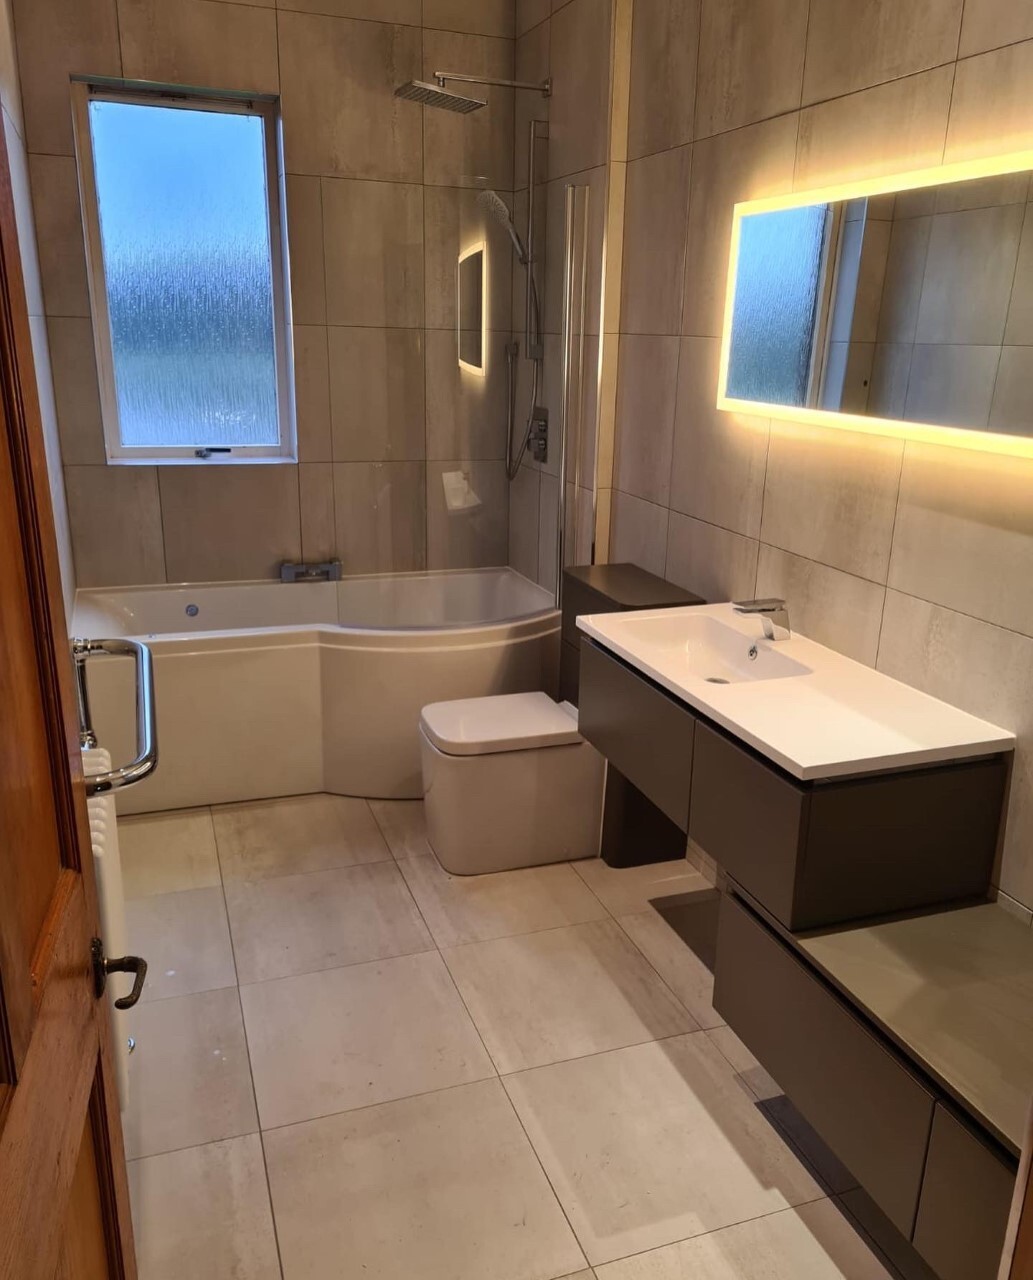 New bathroom fitted by Mcroberts